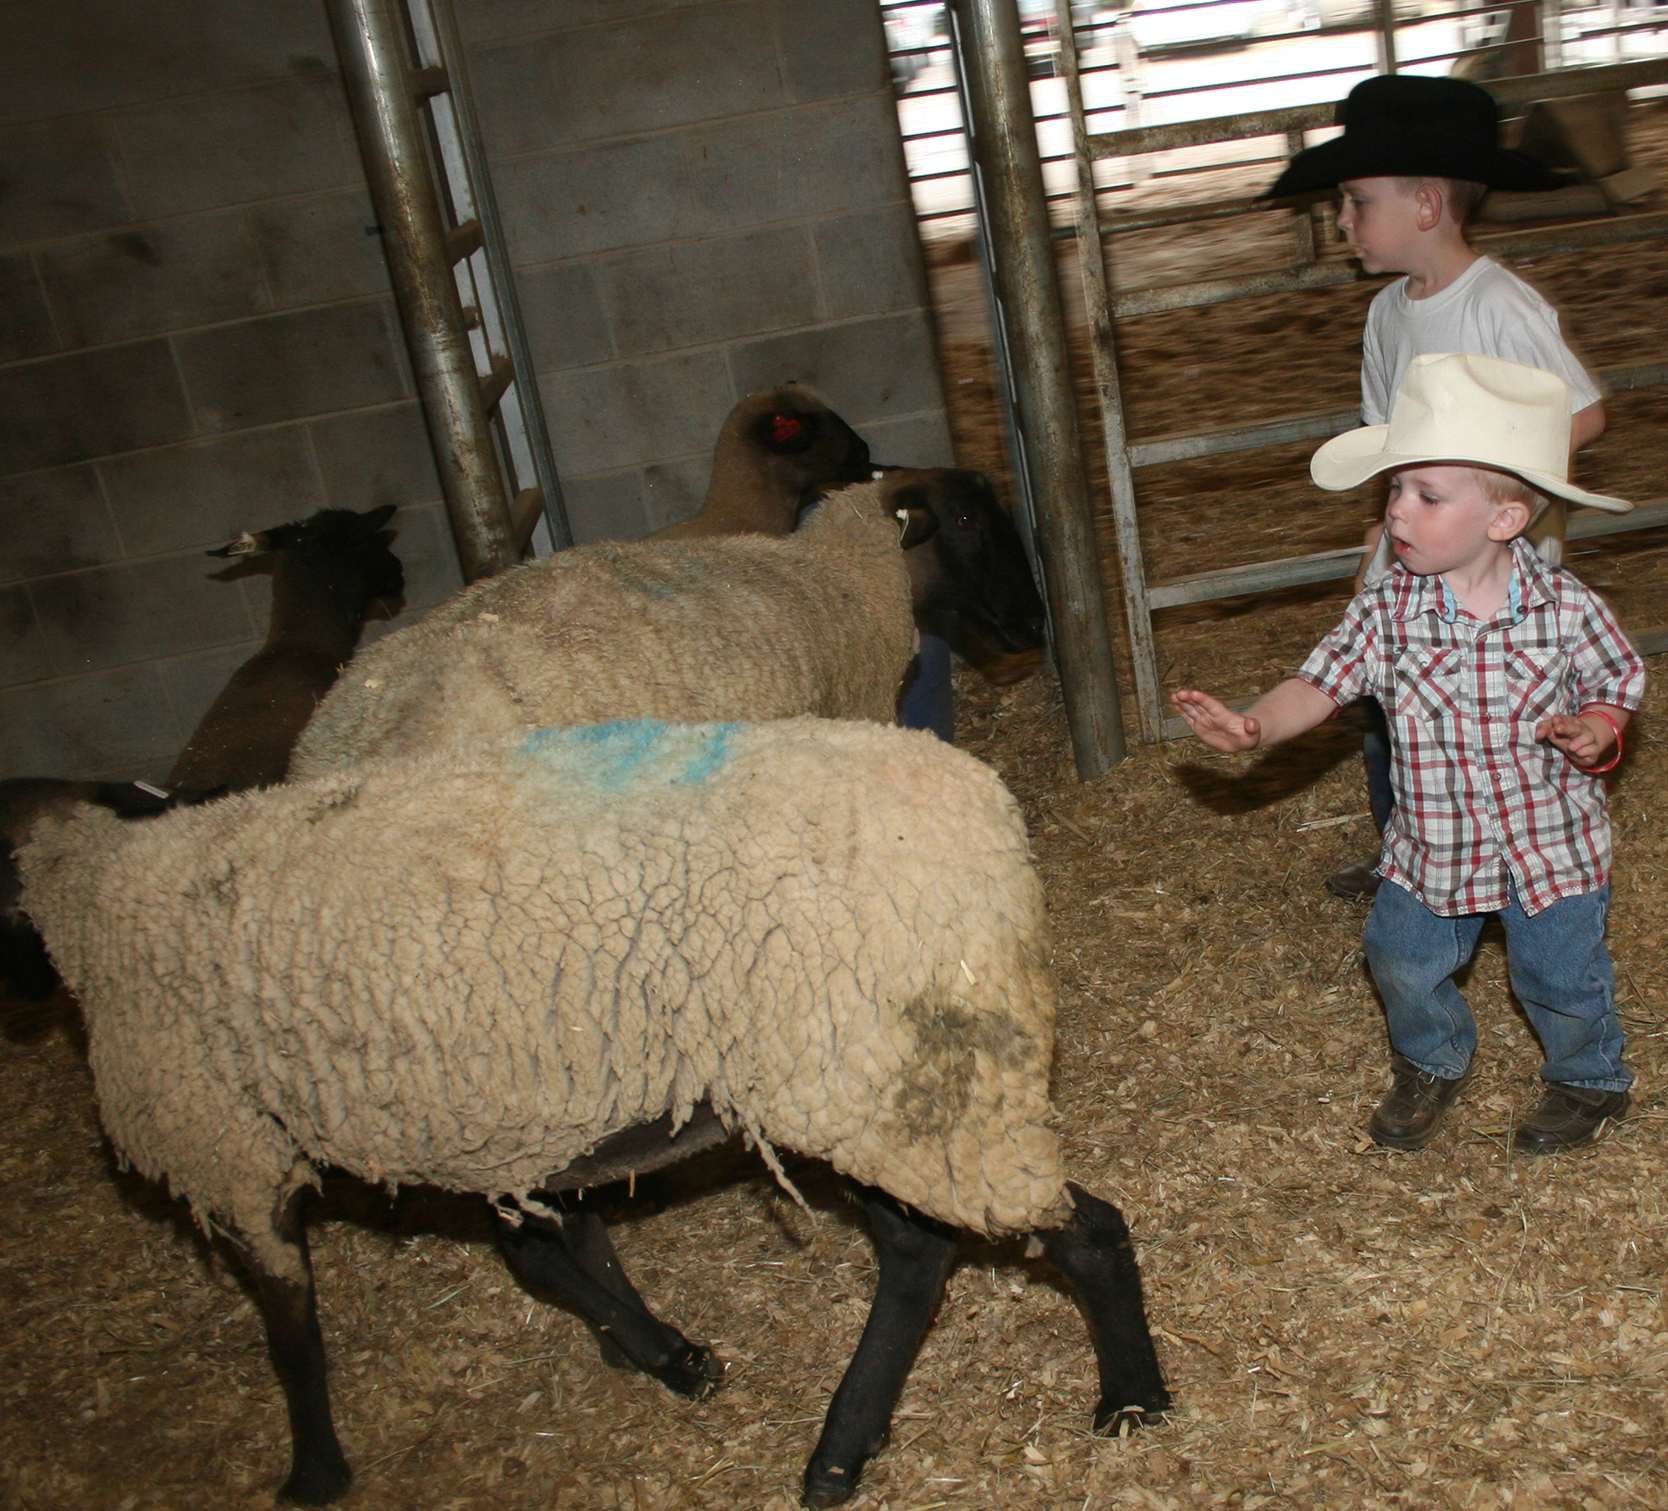 The Great Southland Stampede Rodeo runs April 18-20 in Athens. The 2013 rodeo features a whole host of new children's activities.